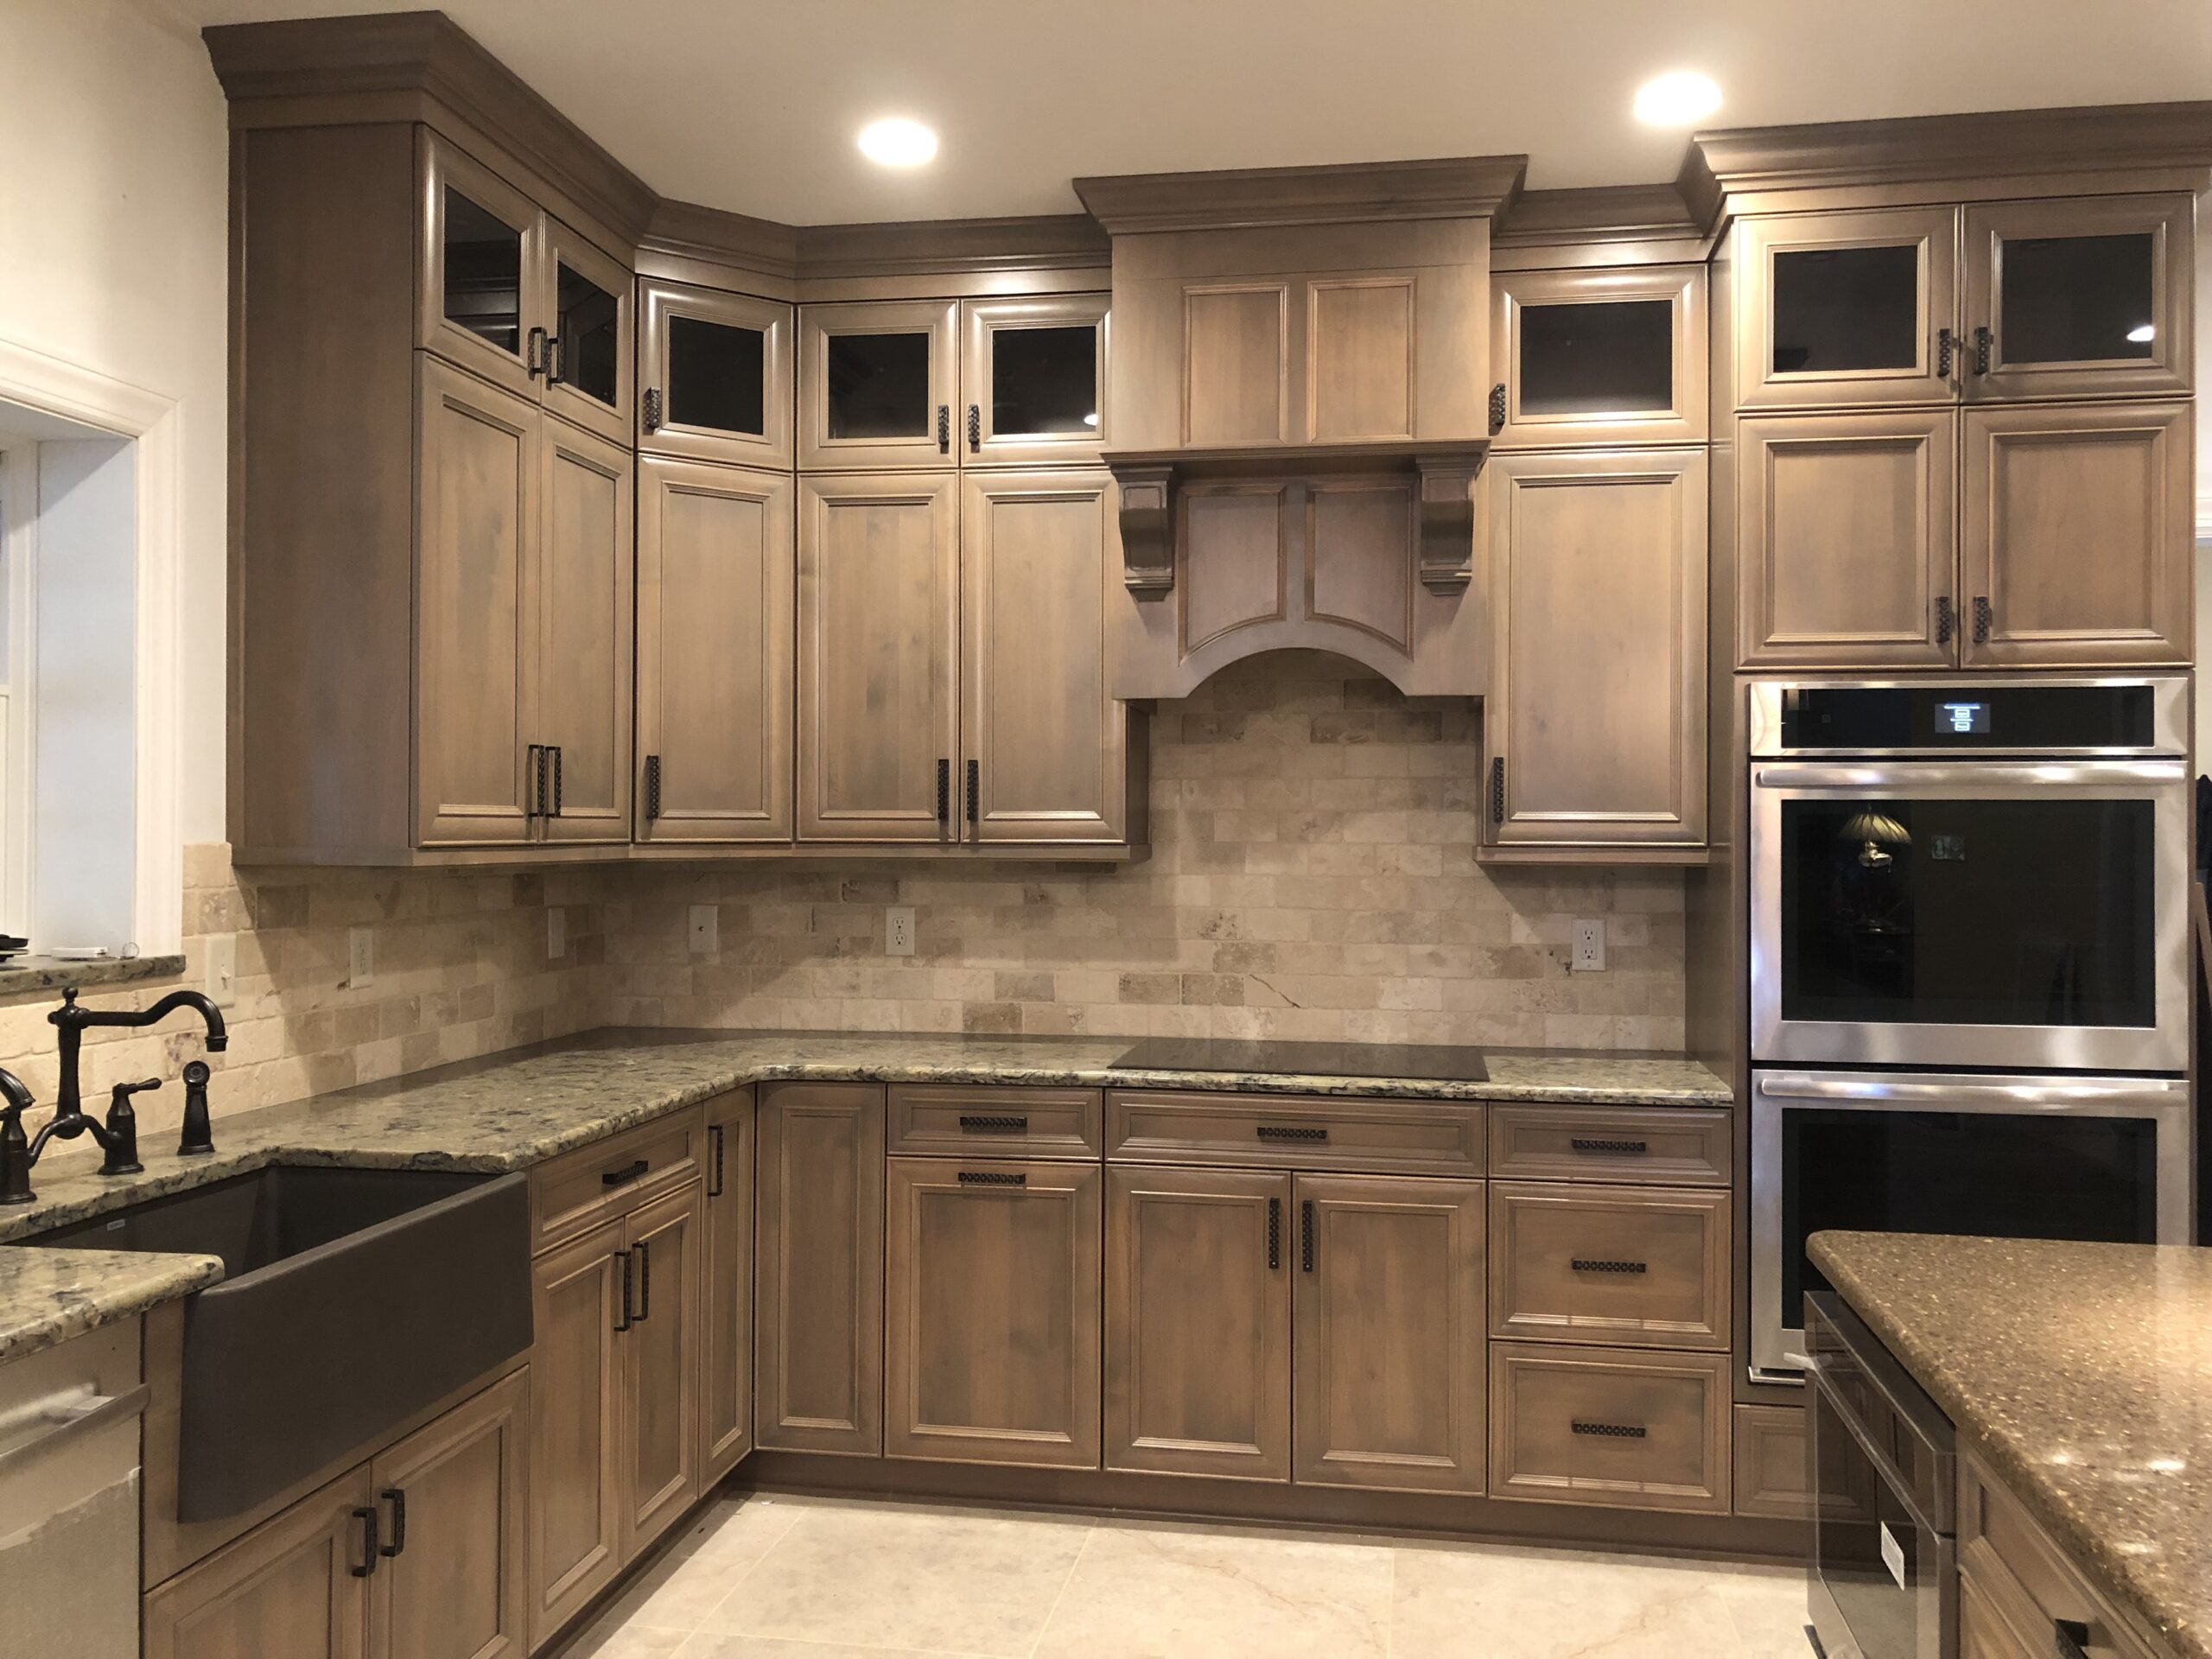 Traditional brown kitchen, traditional wooden furniture storage, marble counter, two ovens